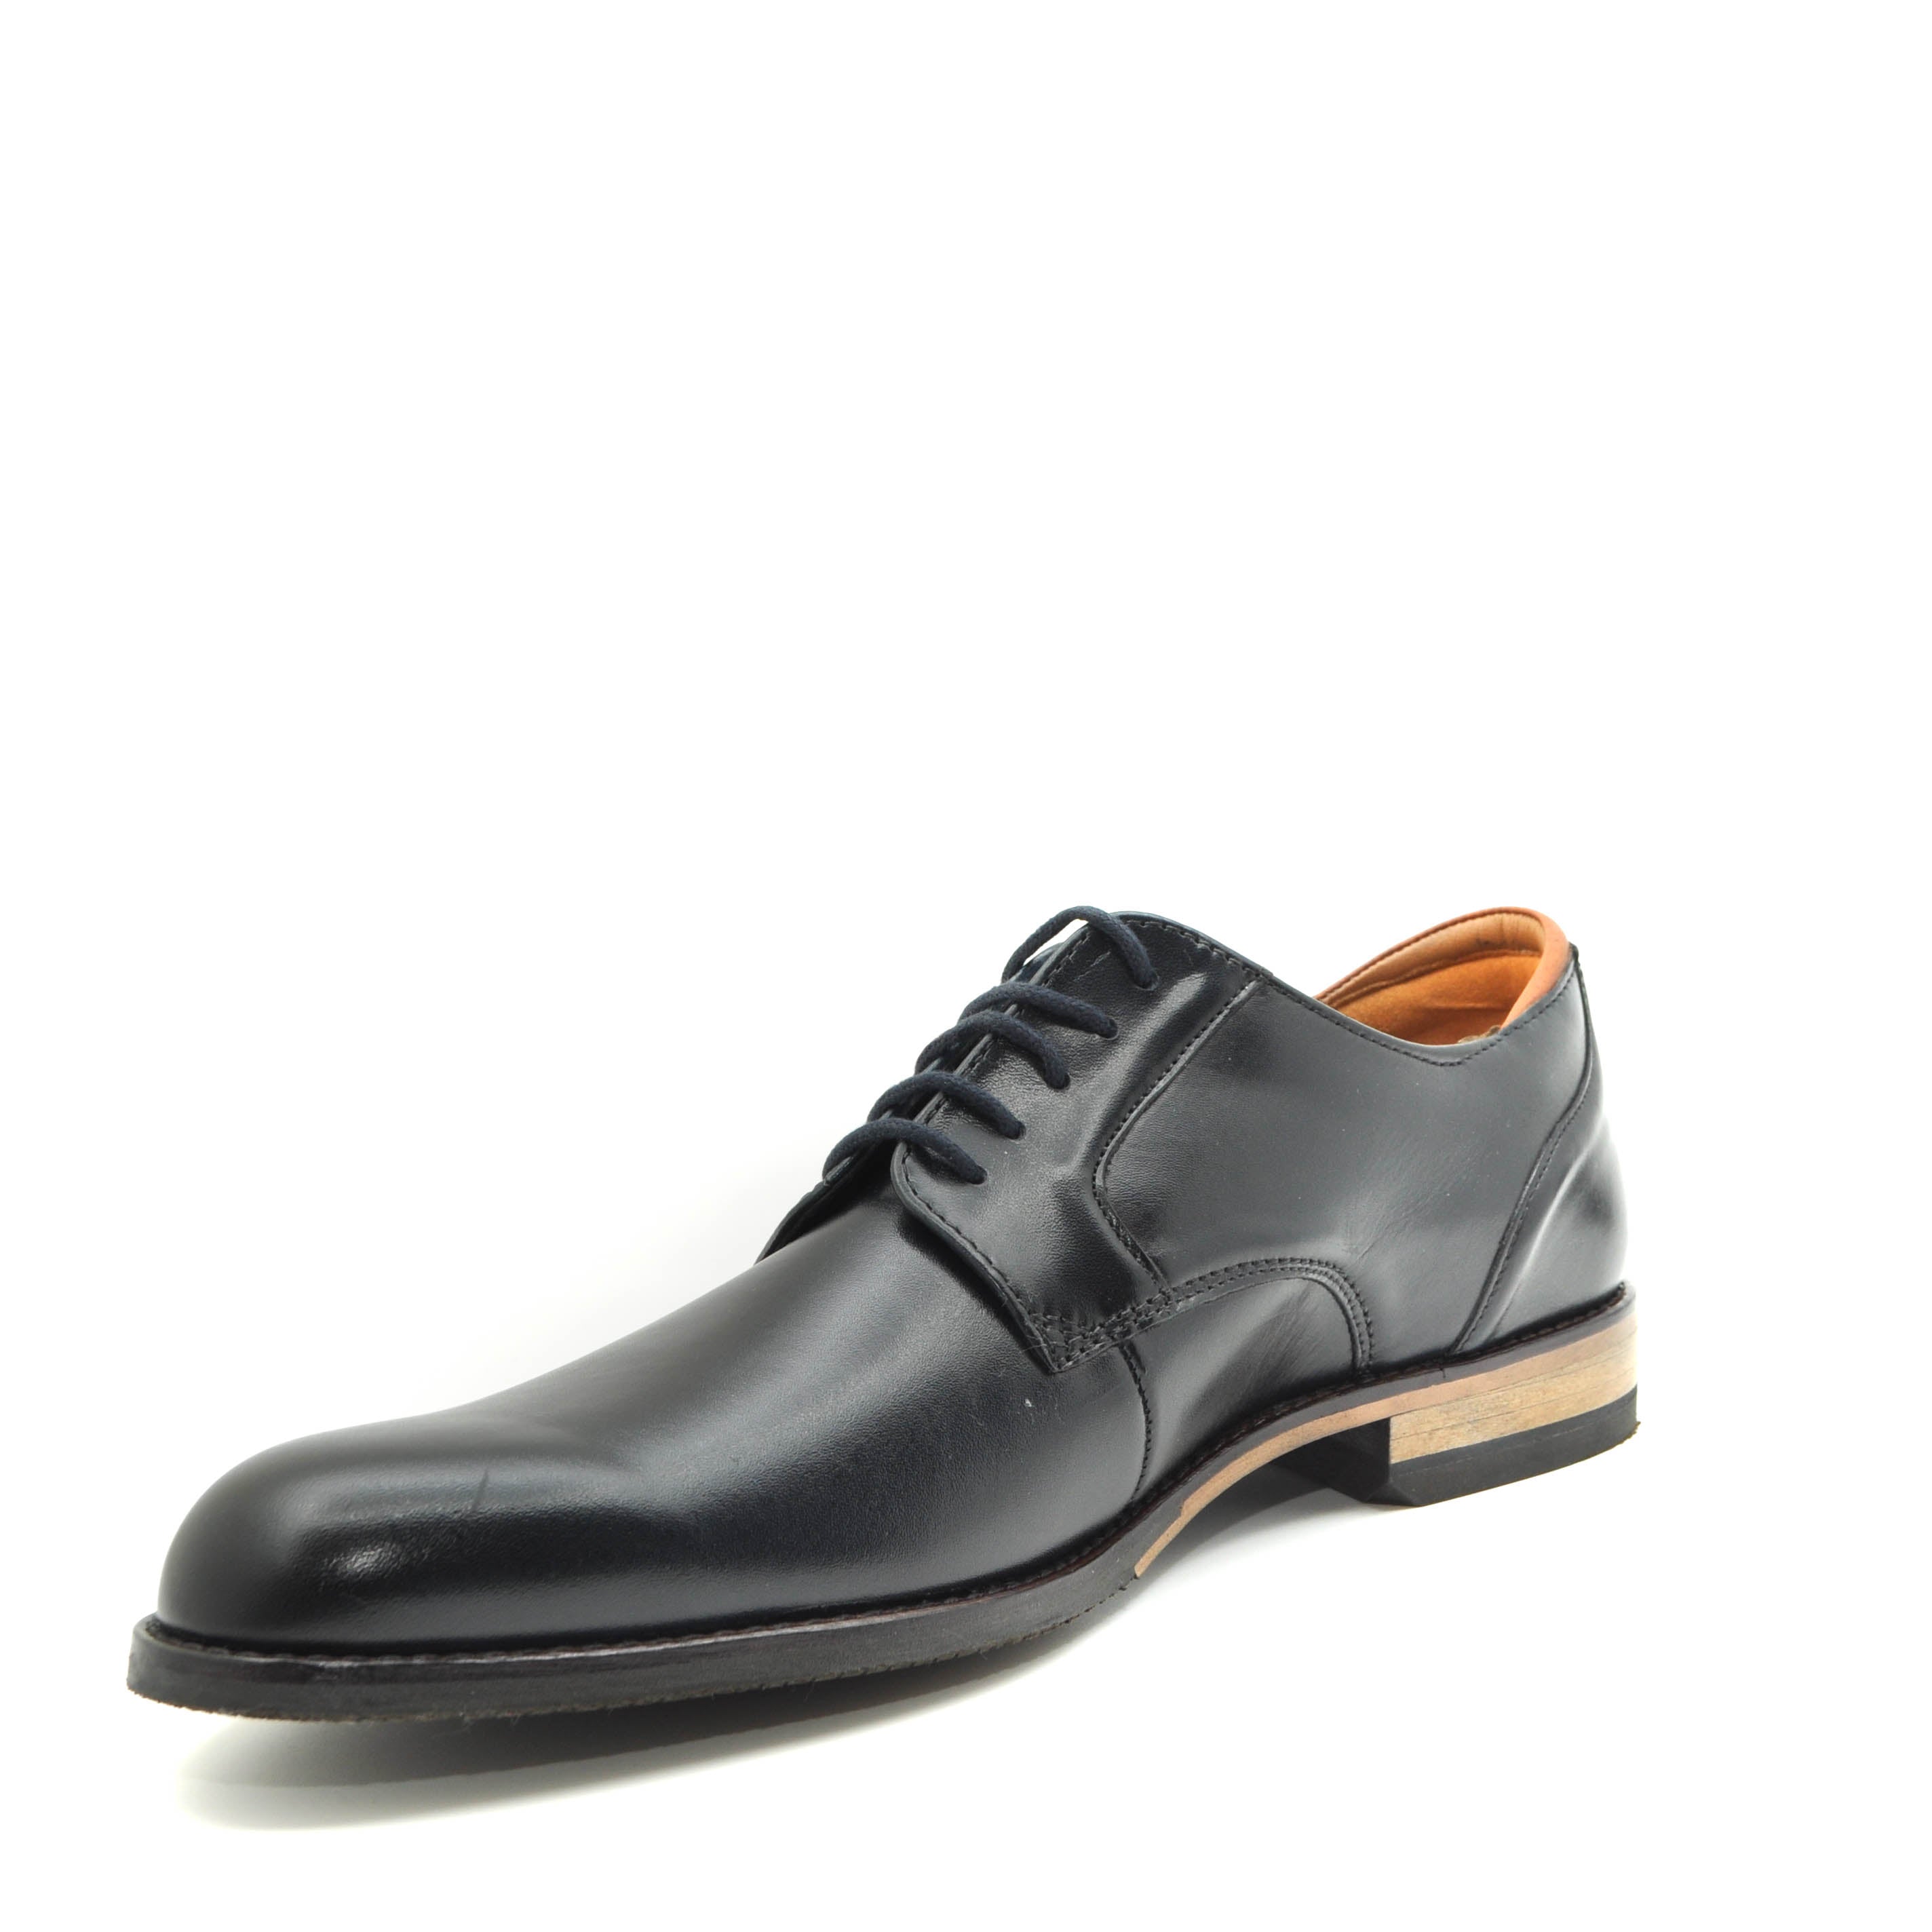 Clarks shoes online ireland | navy leather shoes suit shoes